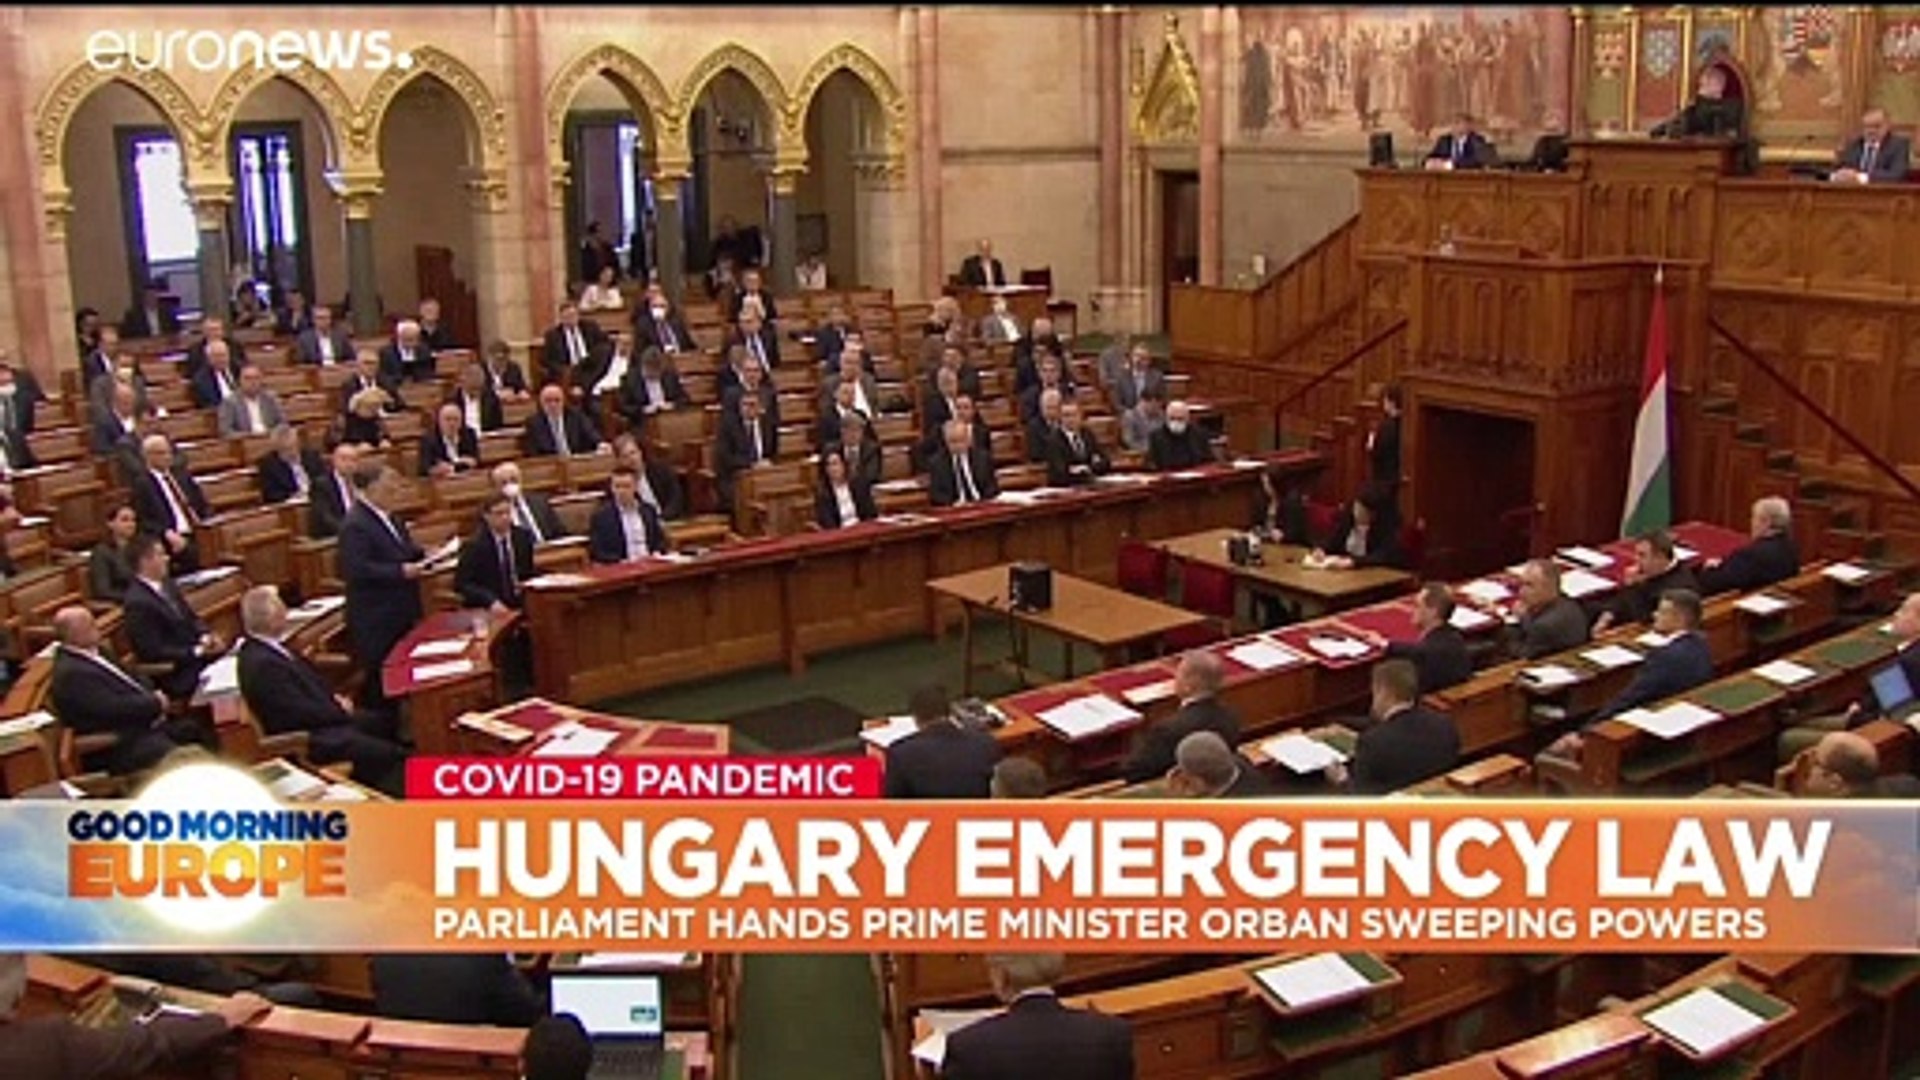 ⁣Hungary's Viktor Orban handed sweeping new powers with COVID-19 law